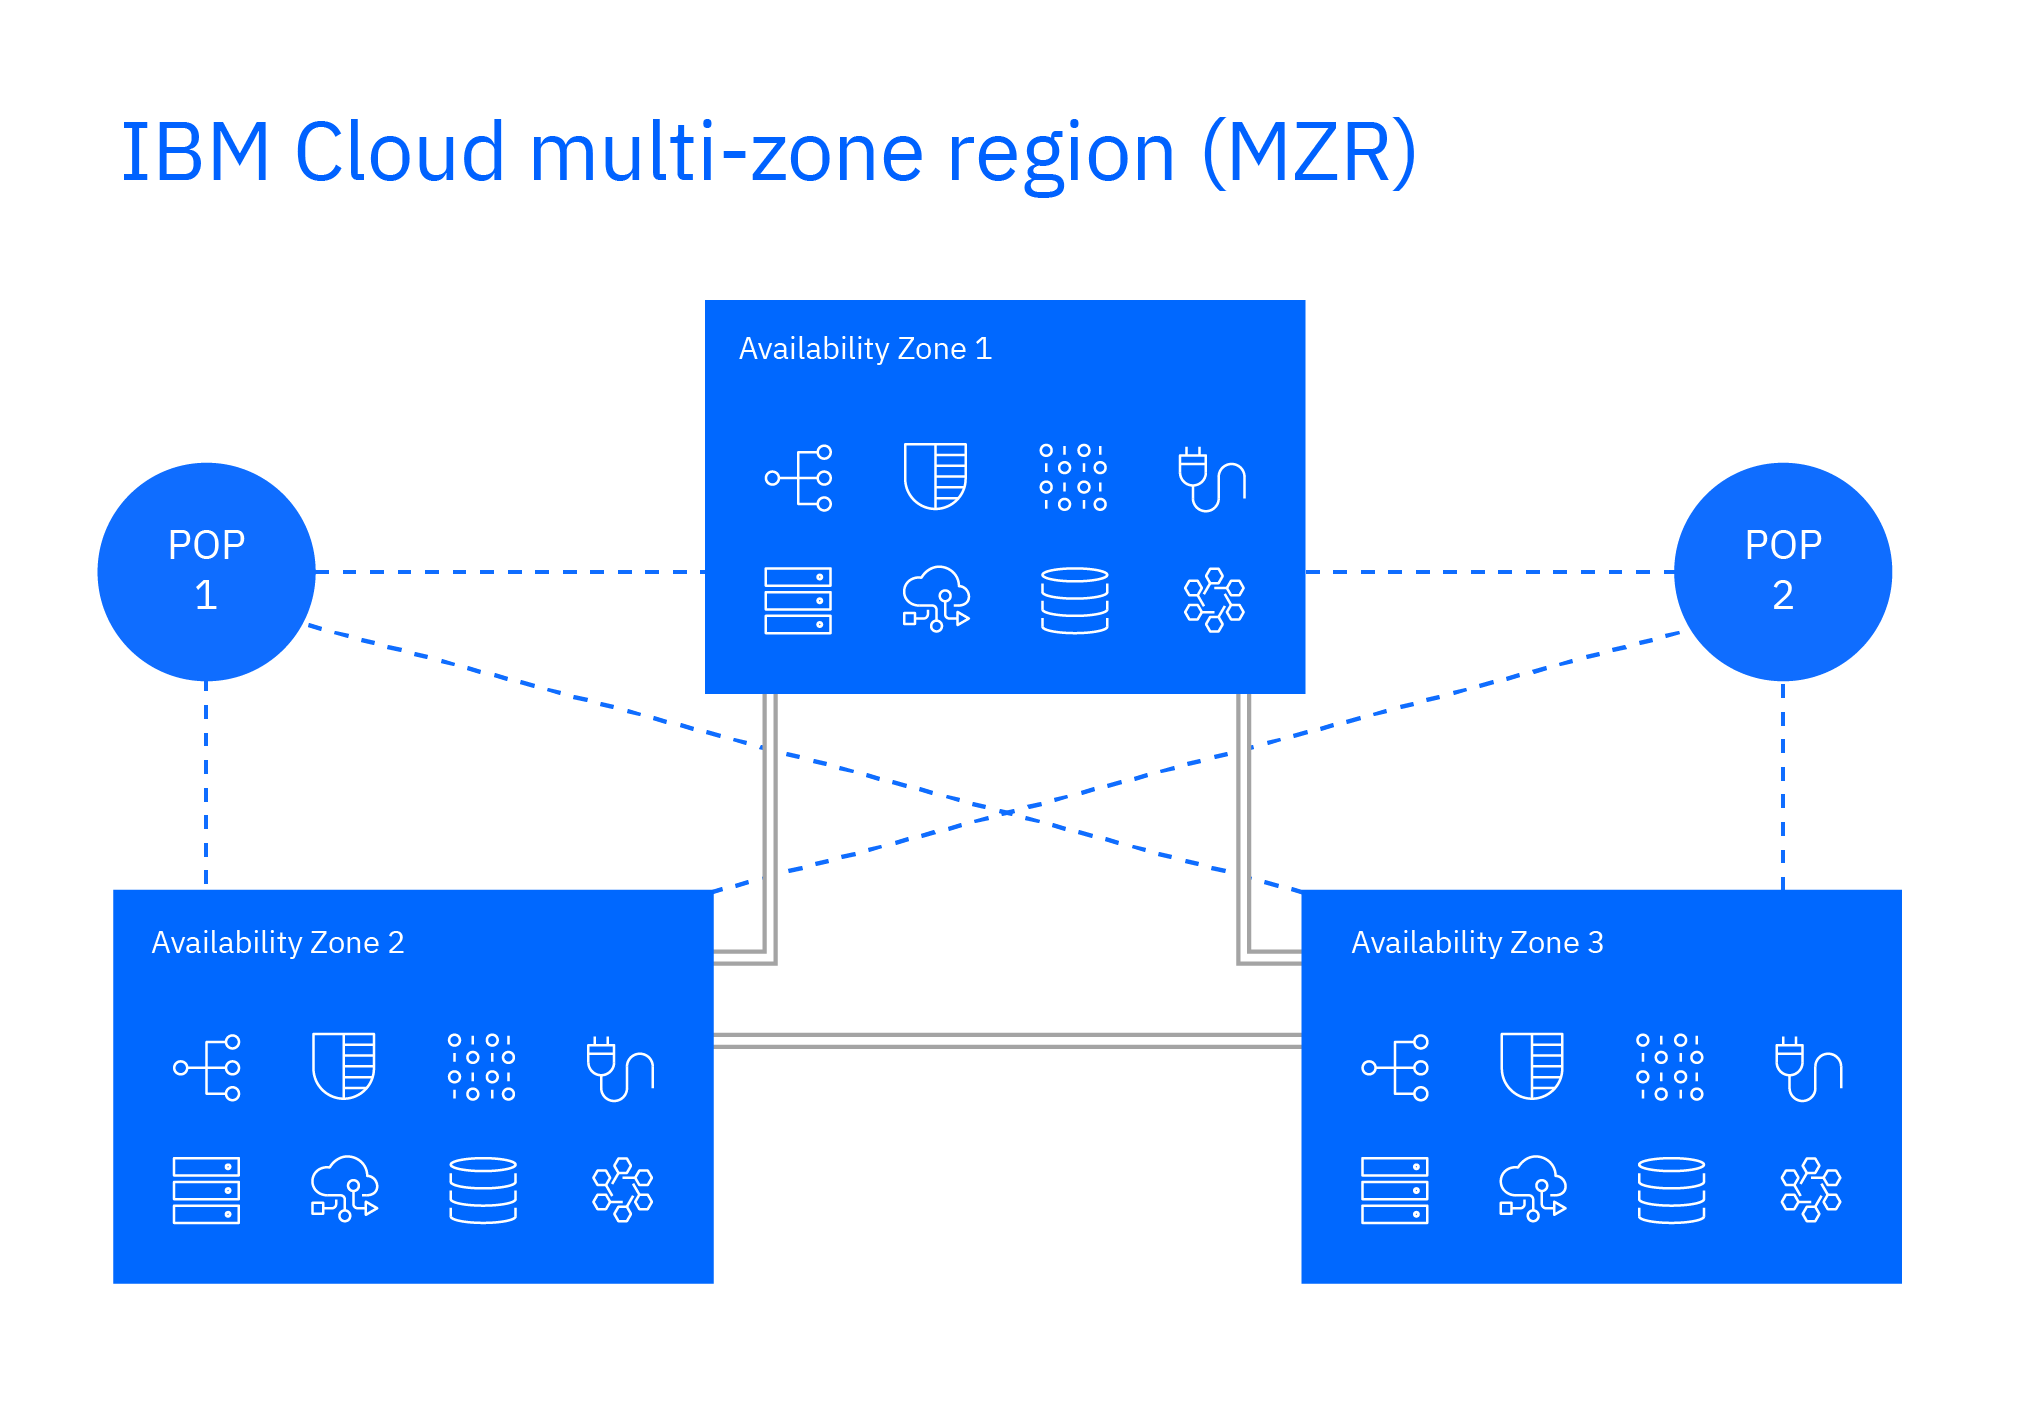 Diagram of IBM Cloud multi-zone region showing connected availability zones and points of presence